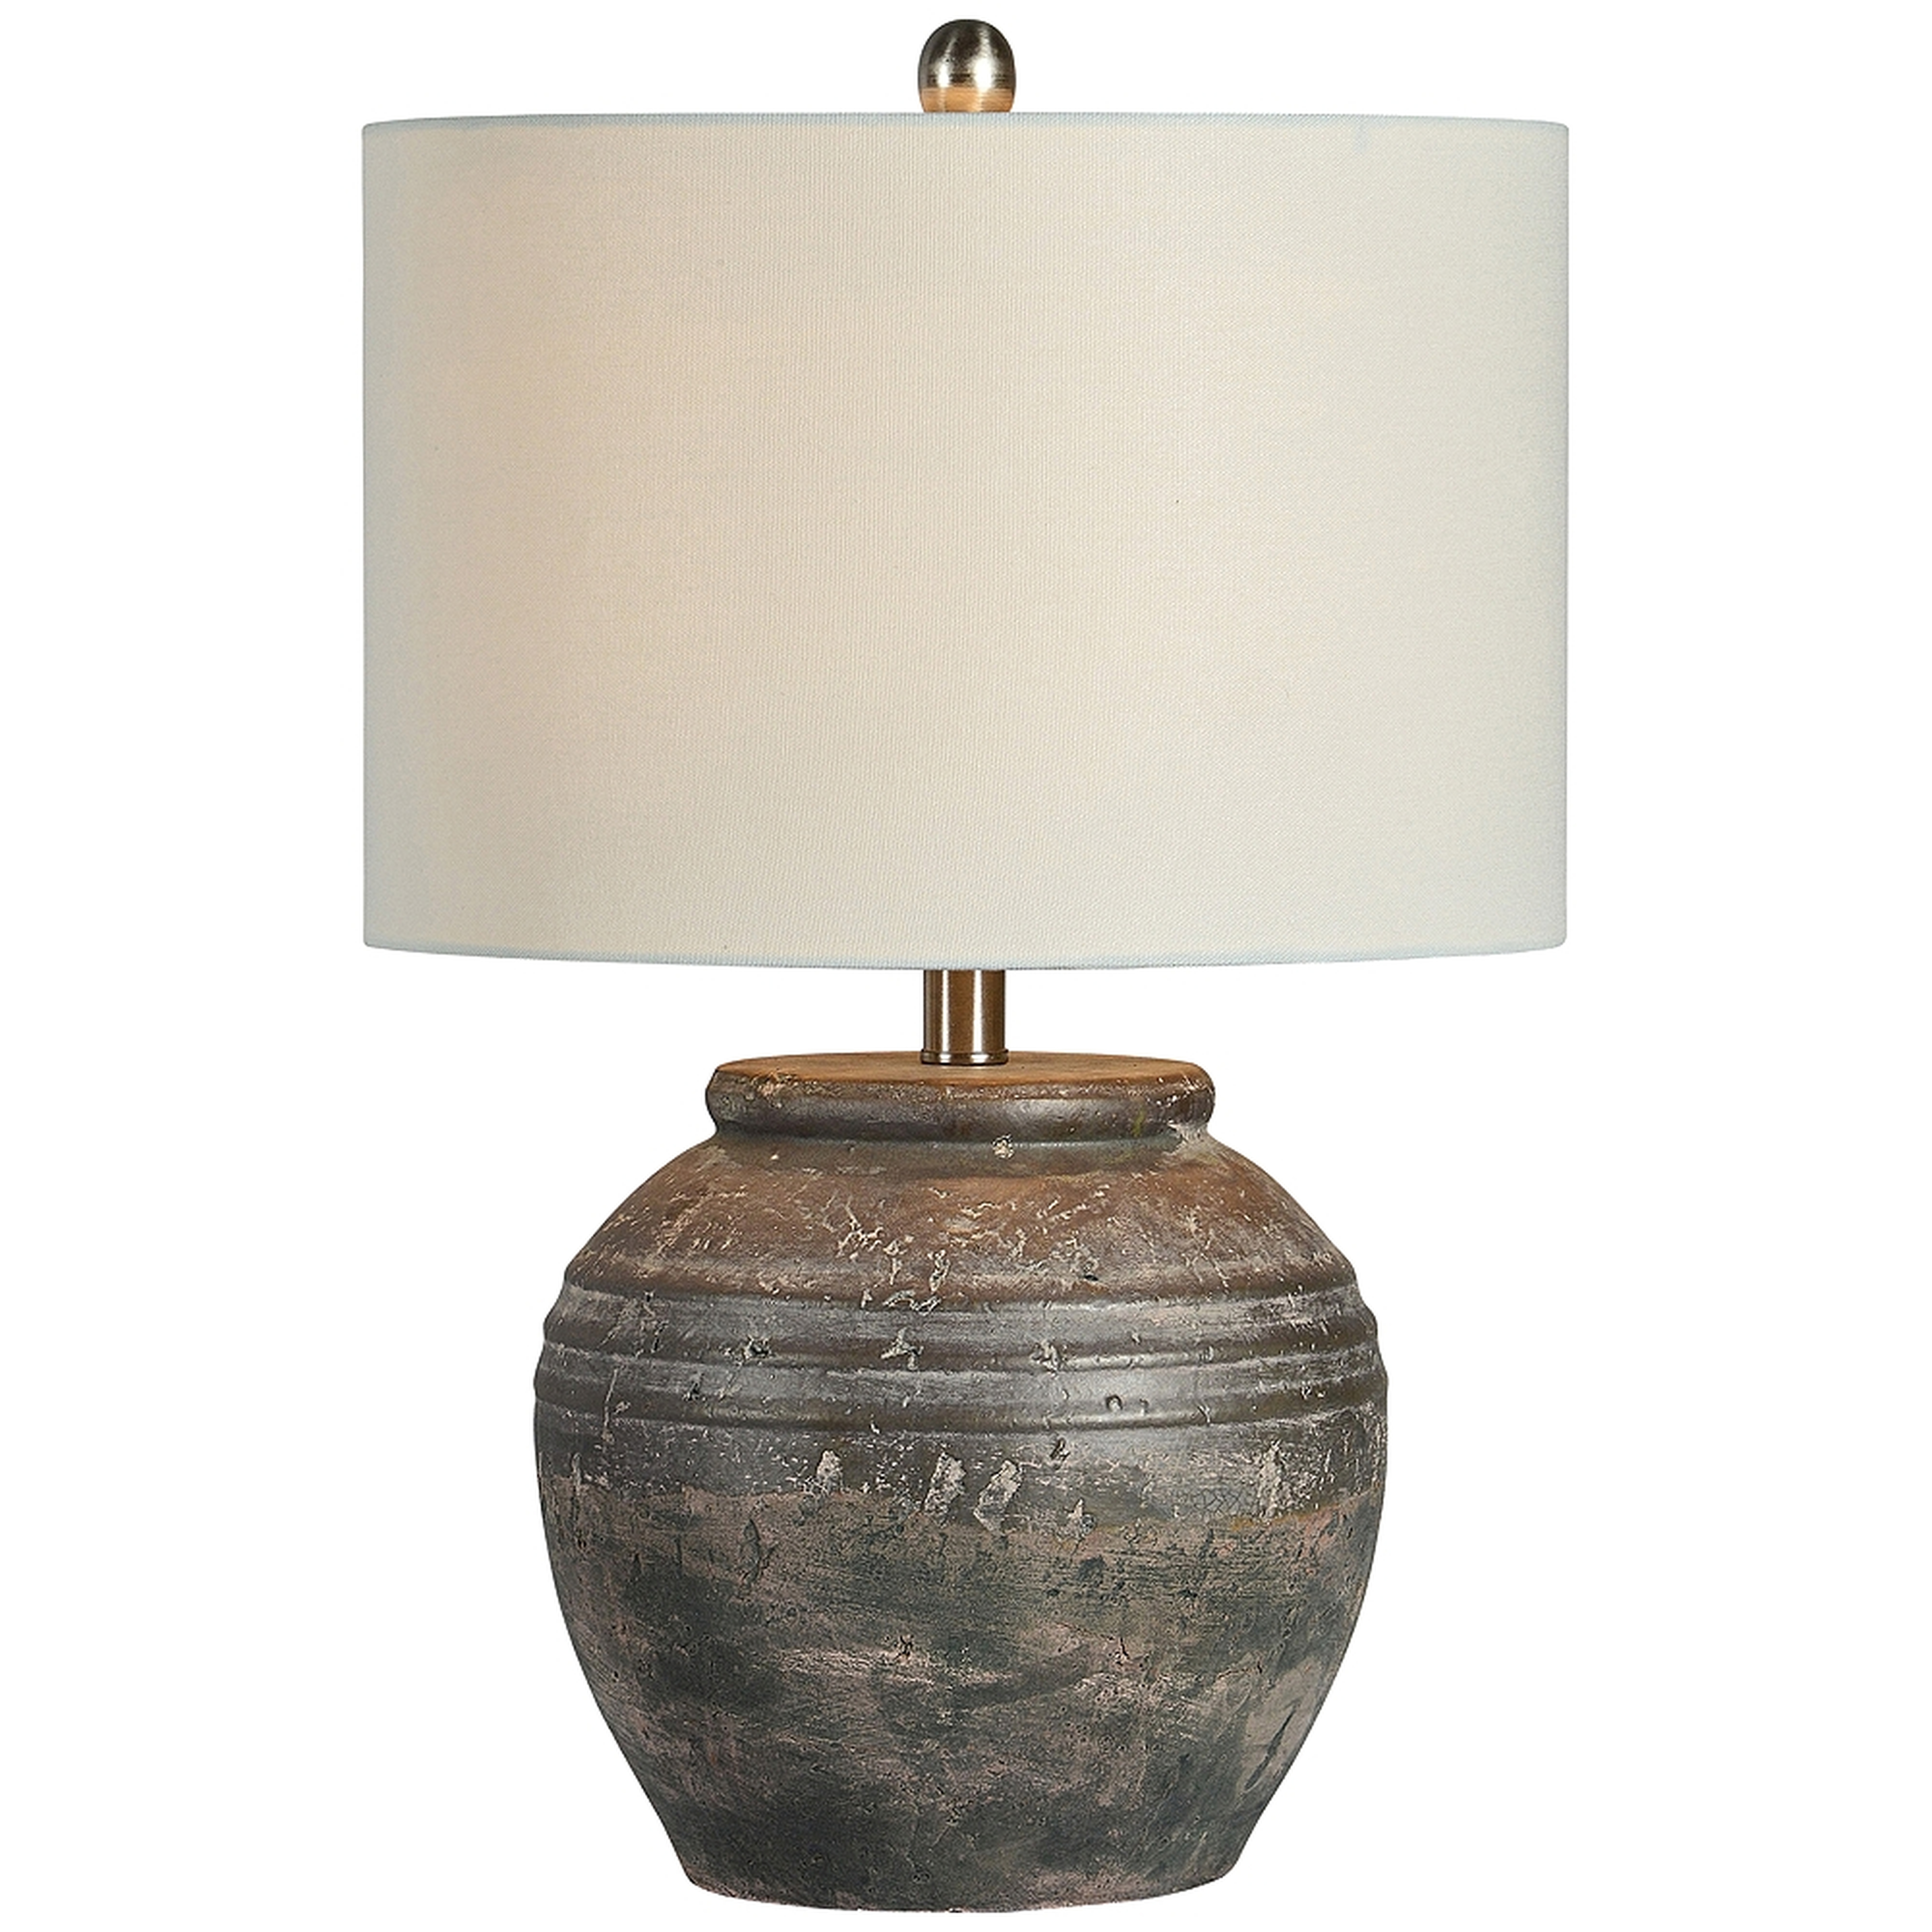 Douglas Shades of Brown Ceramic Accent Table Lamp - Lamps Plus